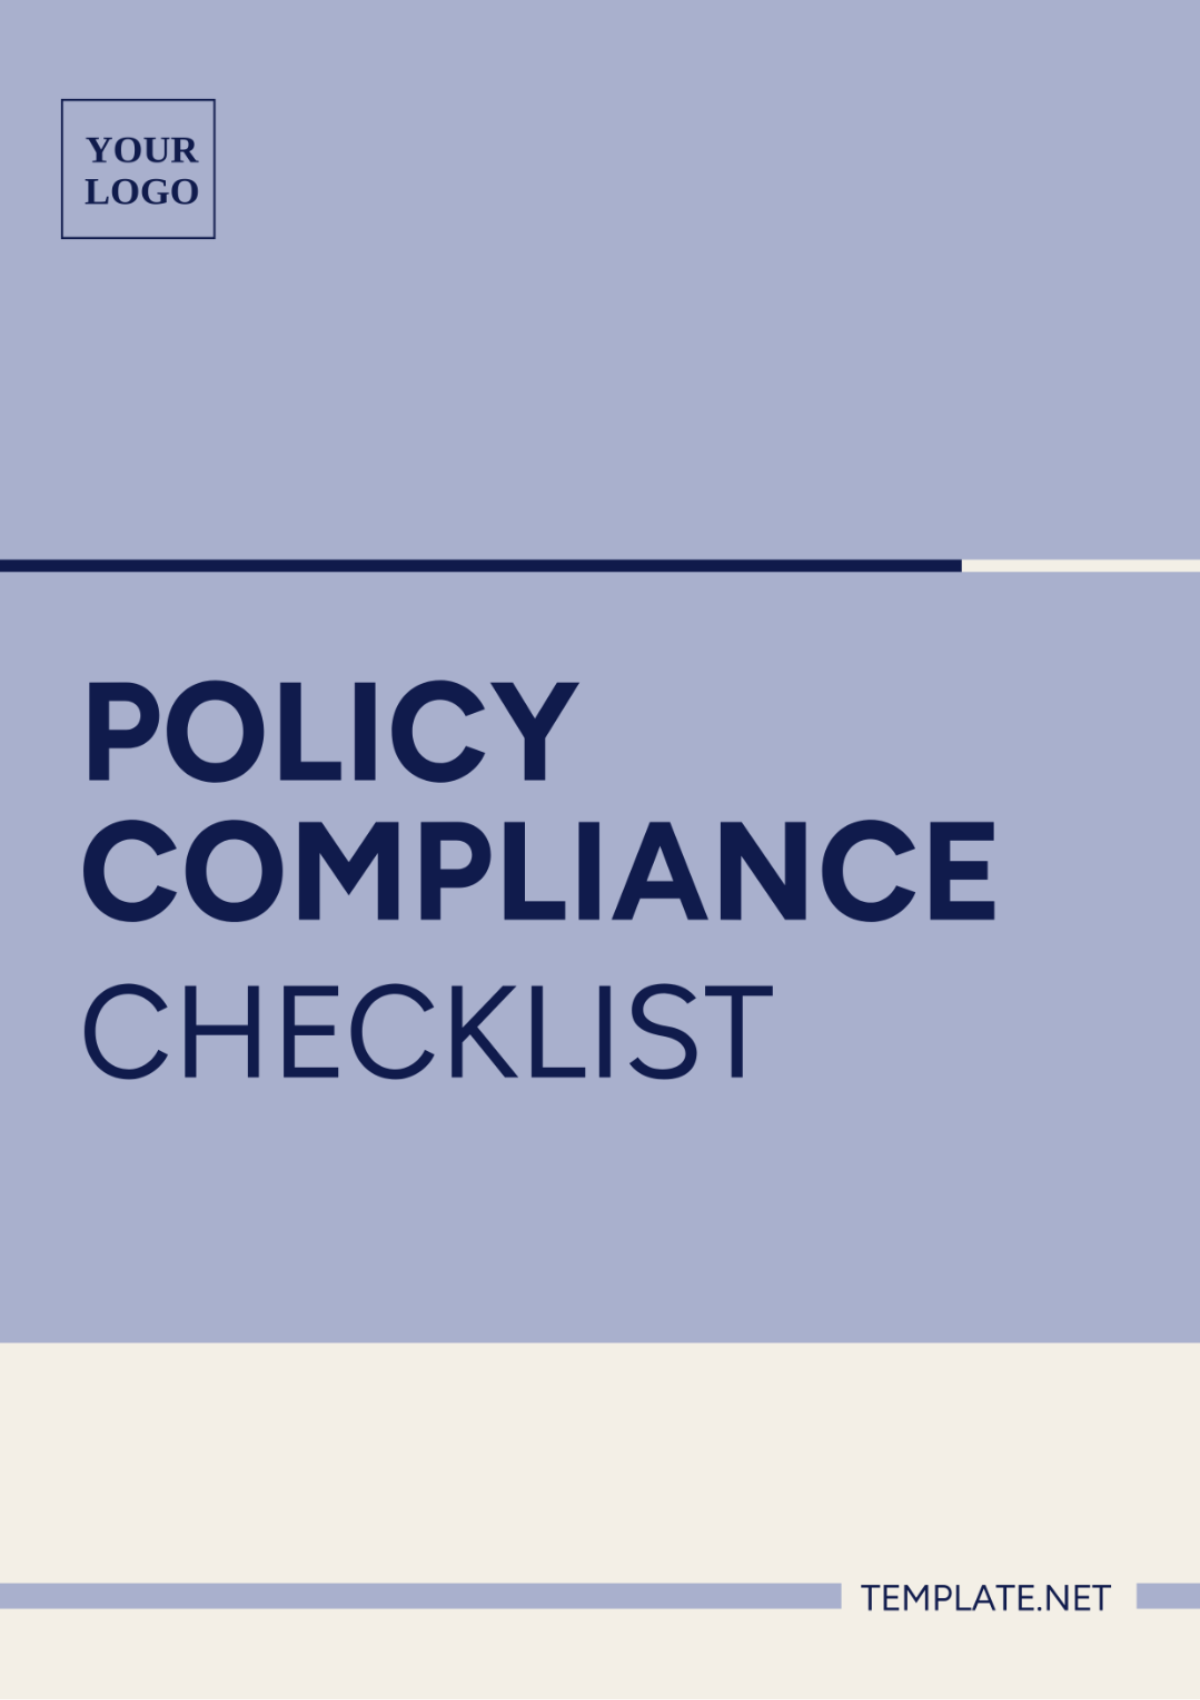 Free Policy Compliance Checklist Template